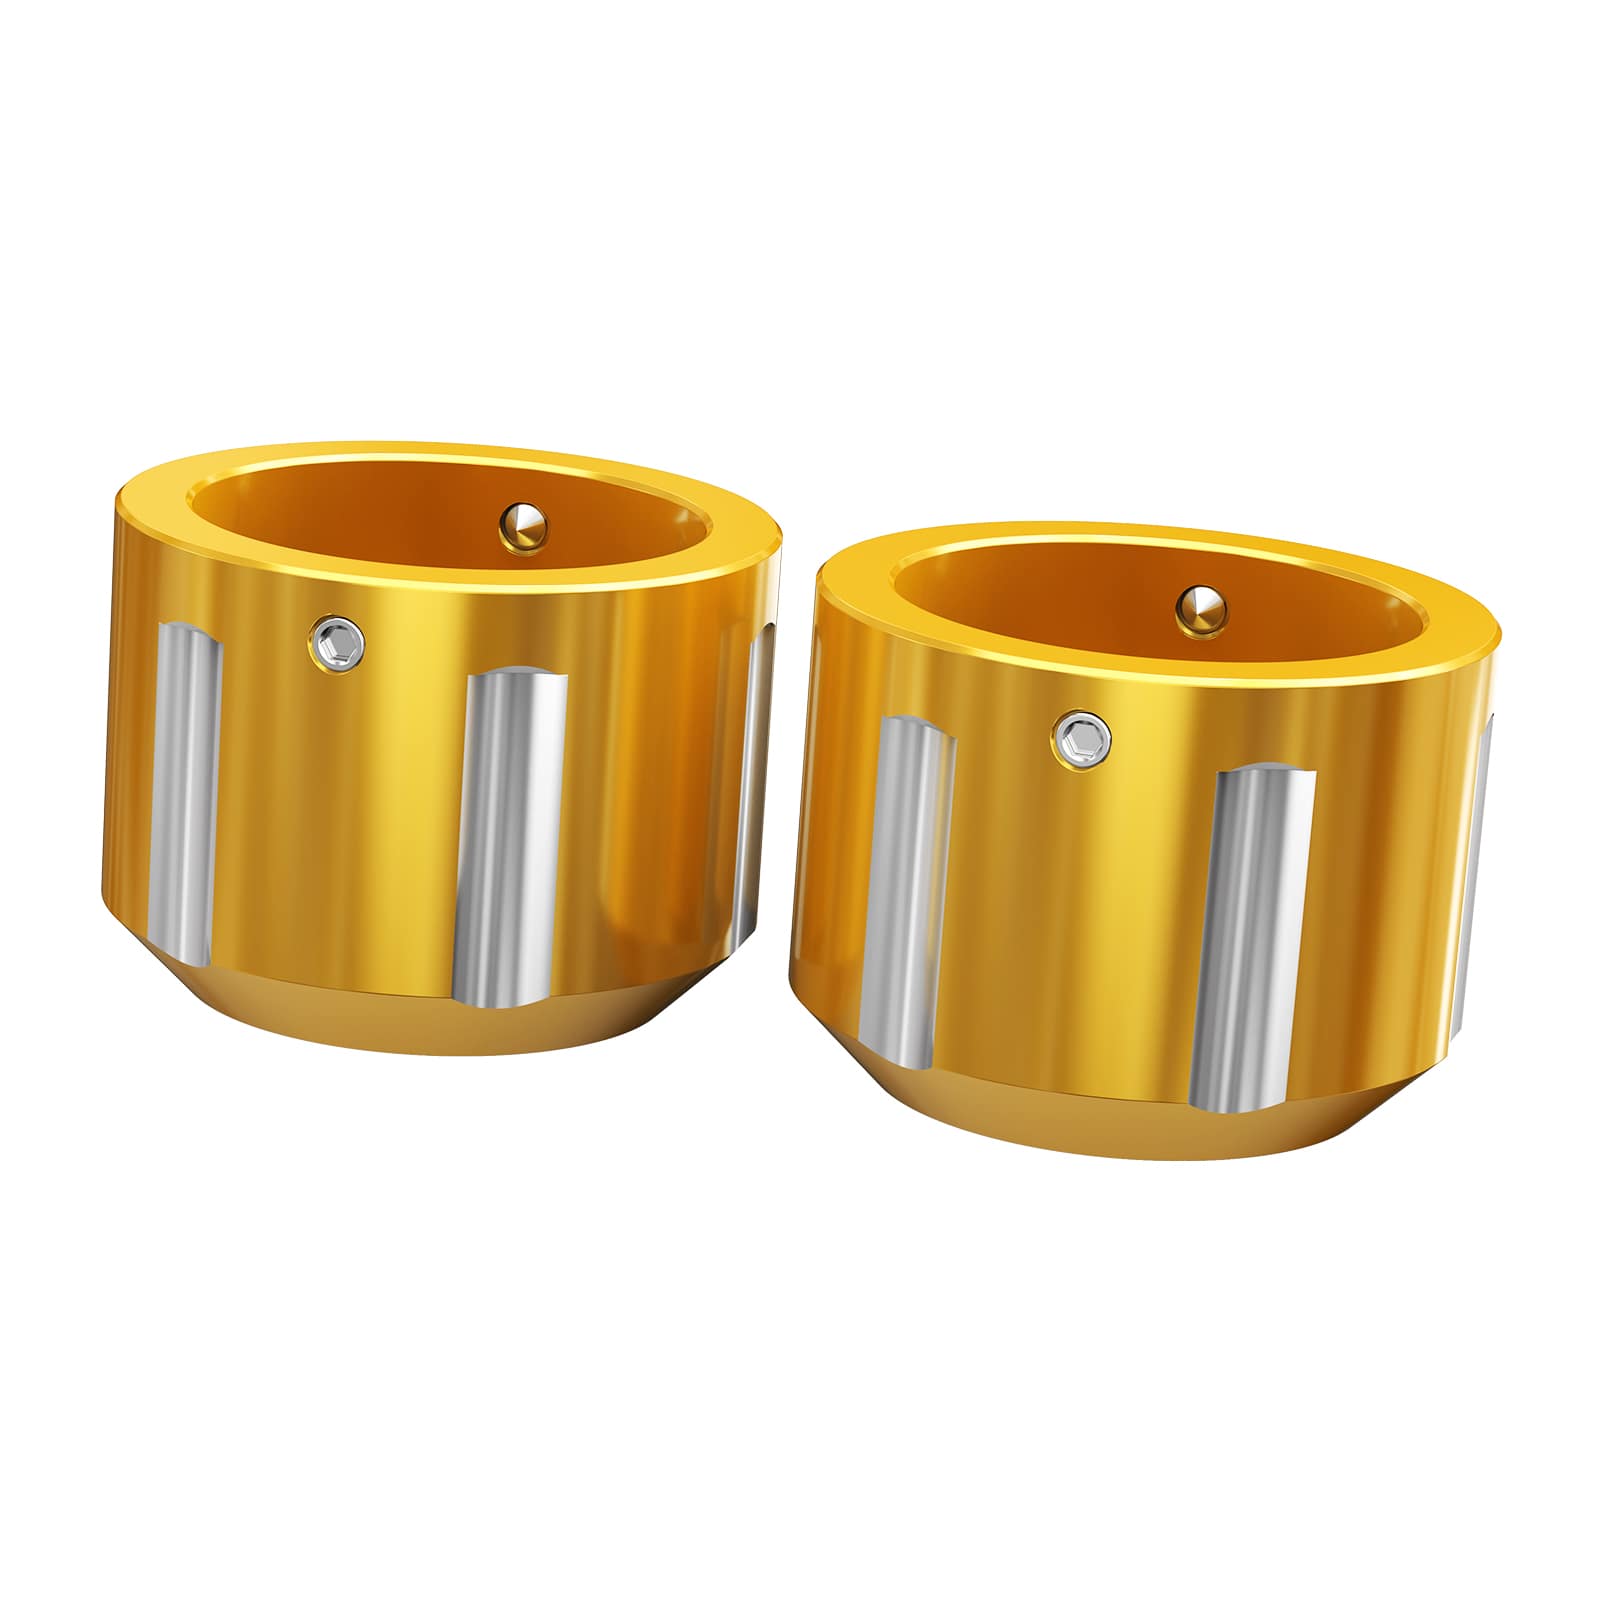 1 pair Rear Axle Nut Covers For Harley Davidson Road King Electra Glide Street Glide